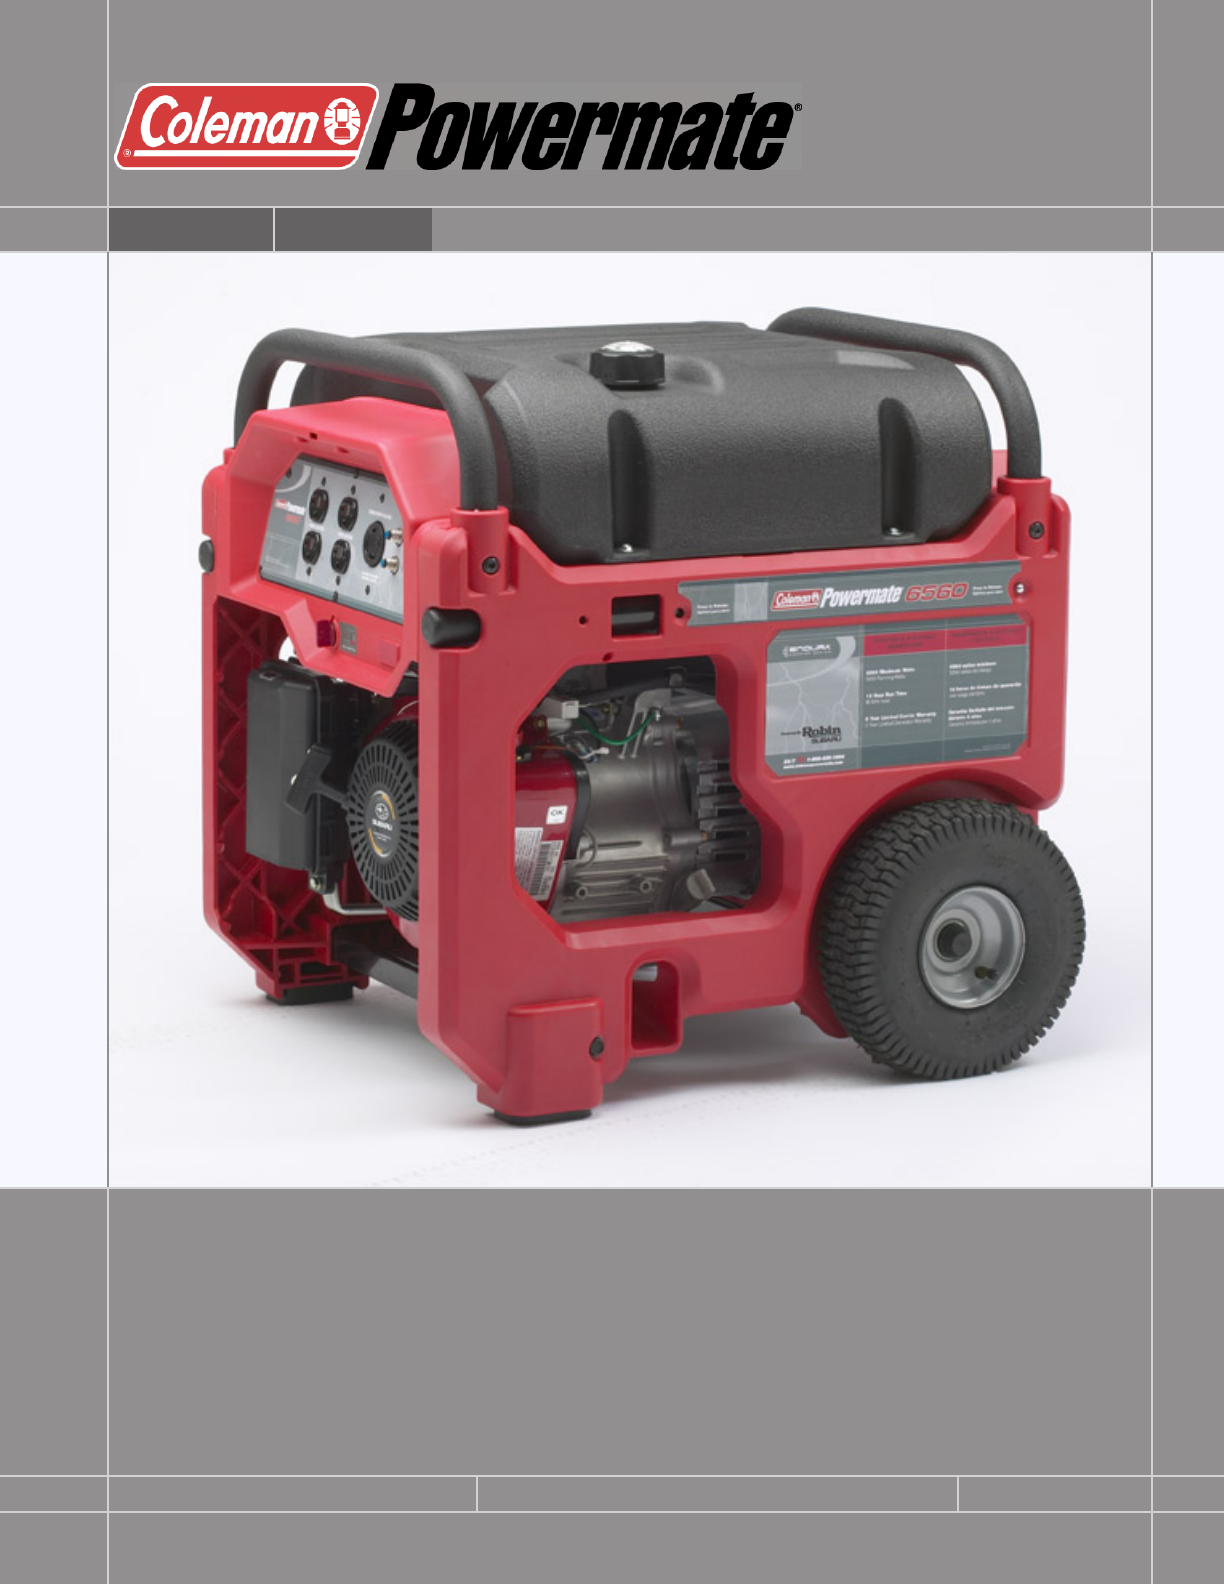 You are currently viewing Coleman Powermate 6560 Generator Troubleshooting Tips